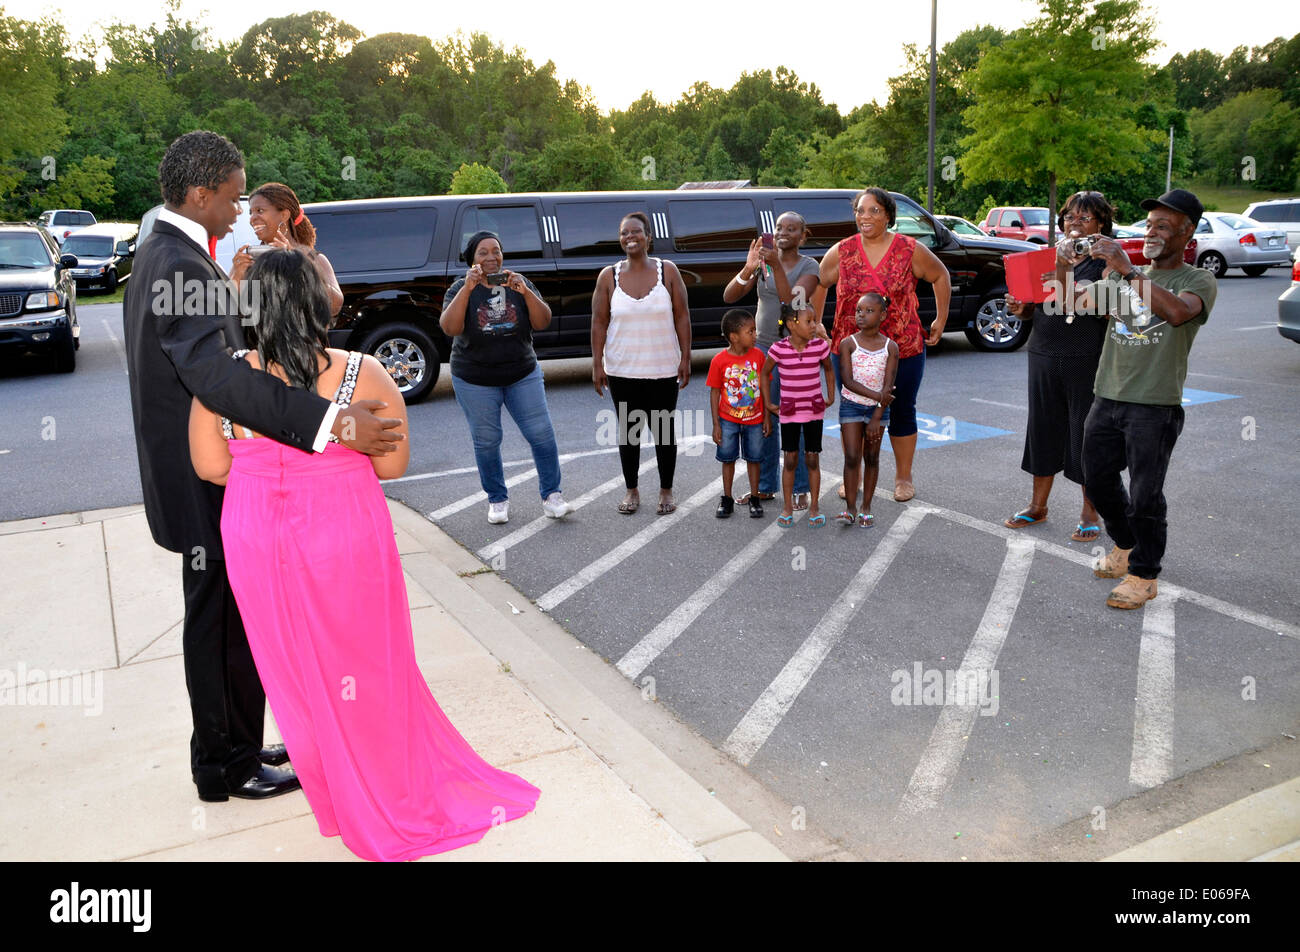 Relatives line up to take pictures of a couple at their arrival at their high school prom Stock Photo